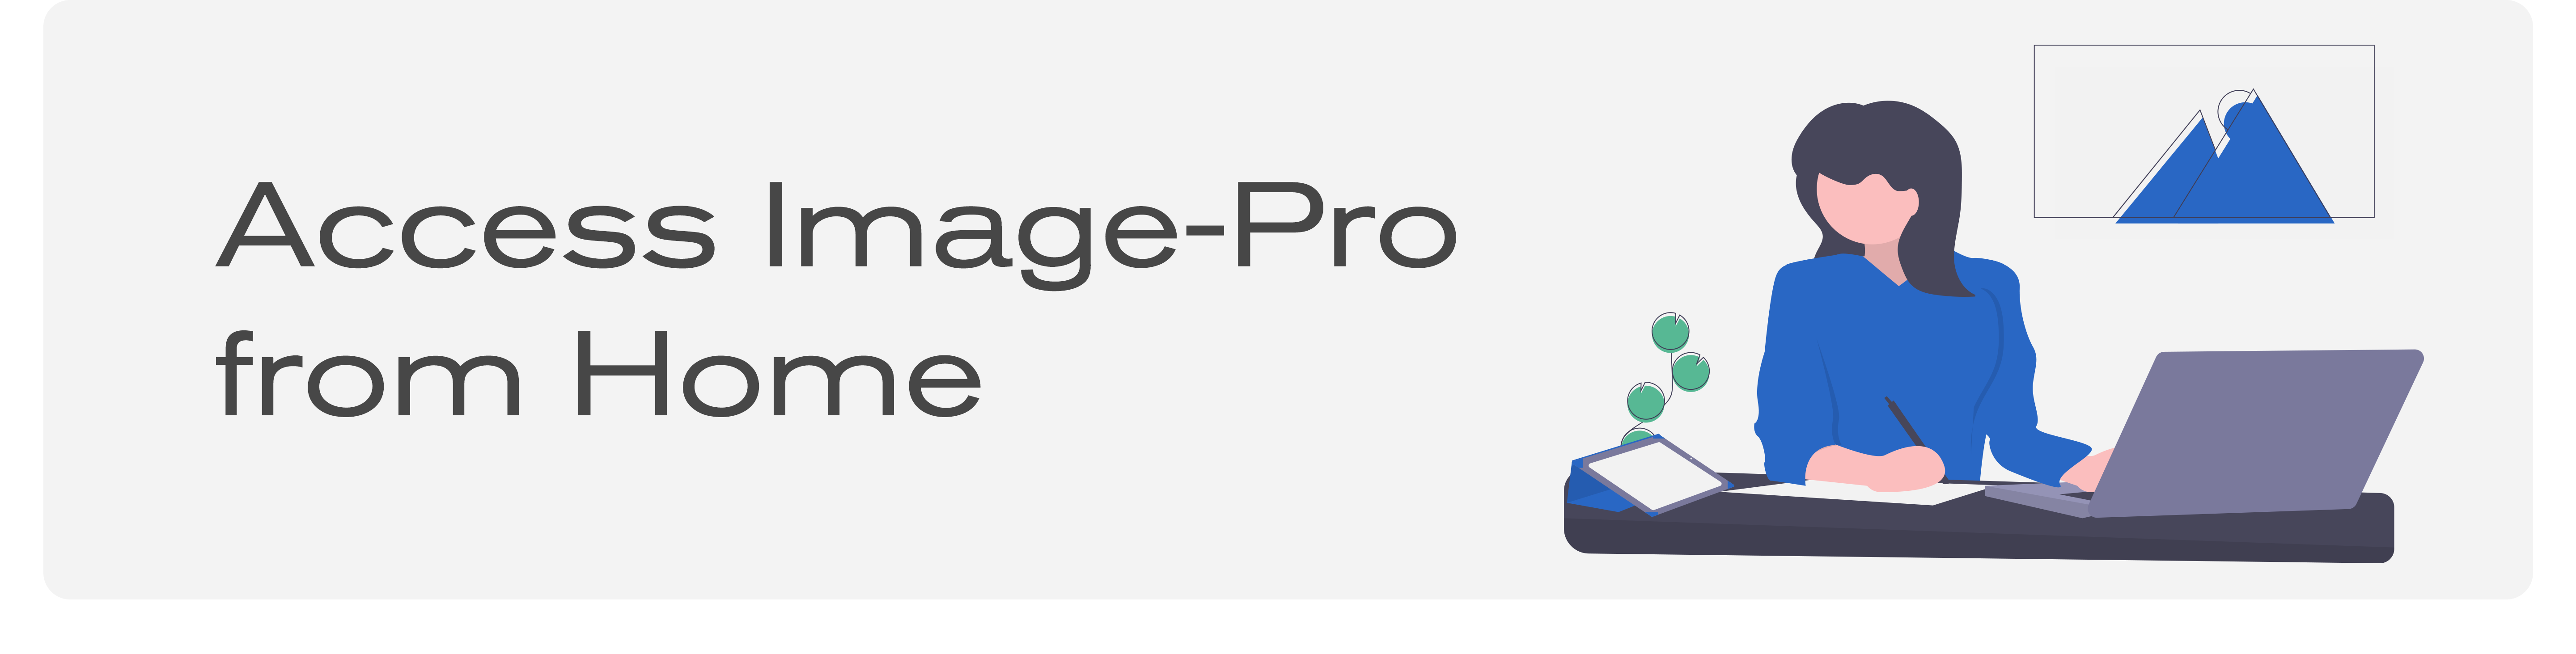 Access Image-Pro from Home